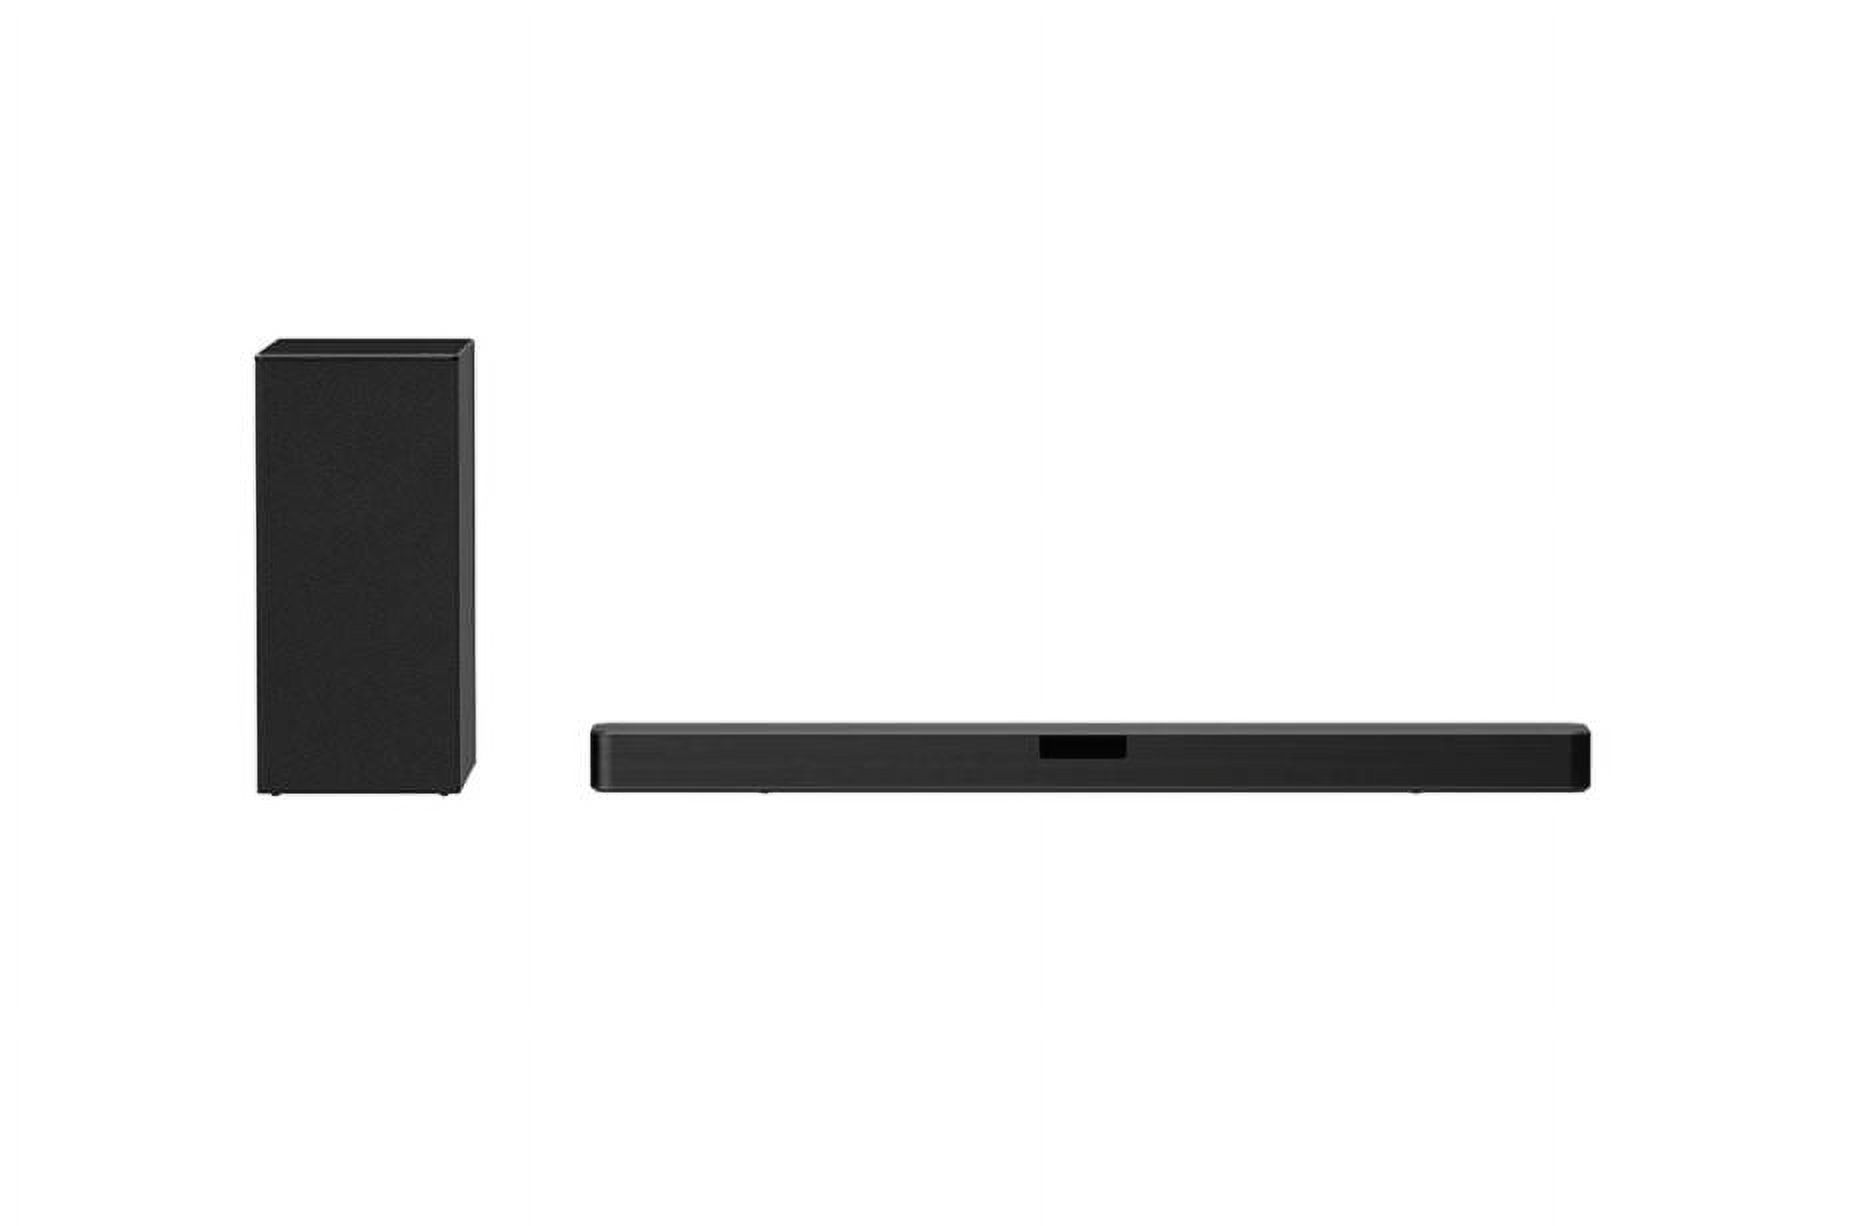 LG 2.1 Channel High Resolution Audio Sound Bar with DTS Virtual:X, SNC5A - image 1 of 3